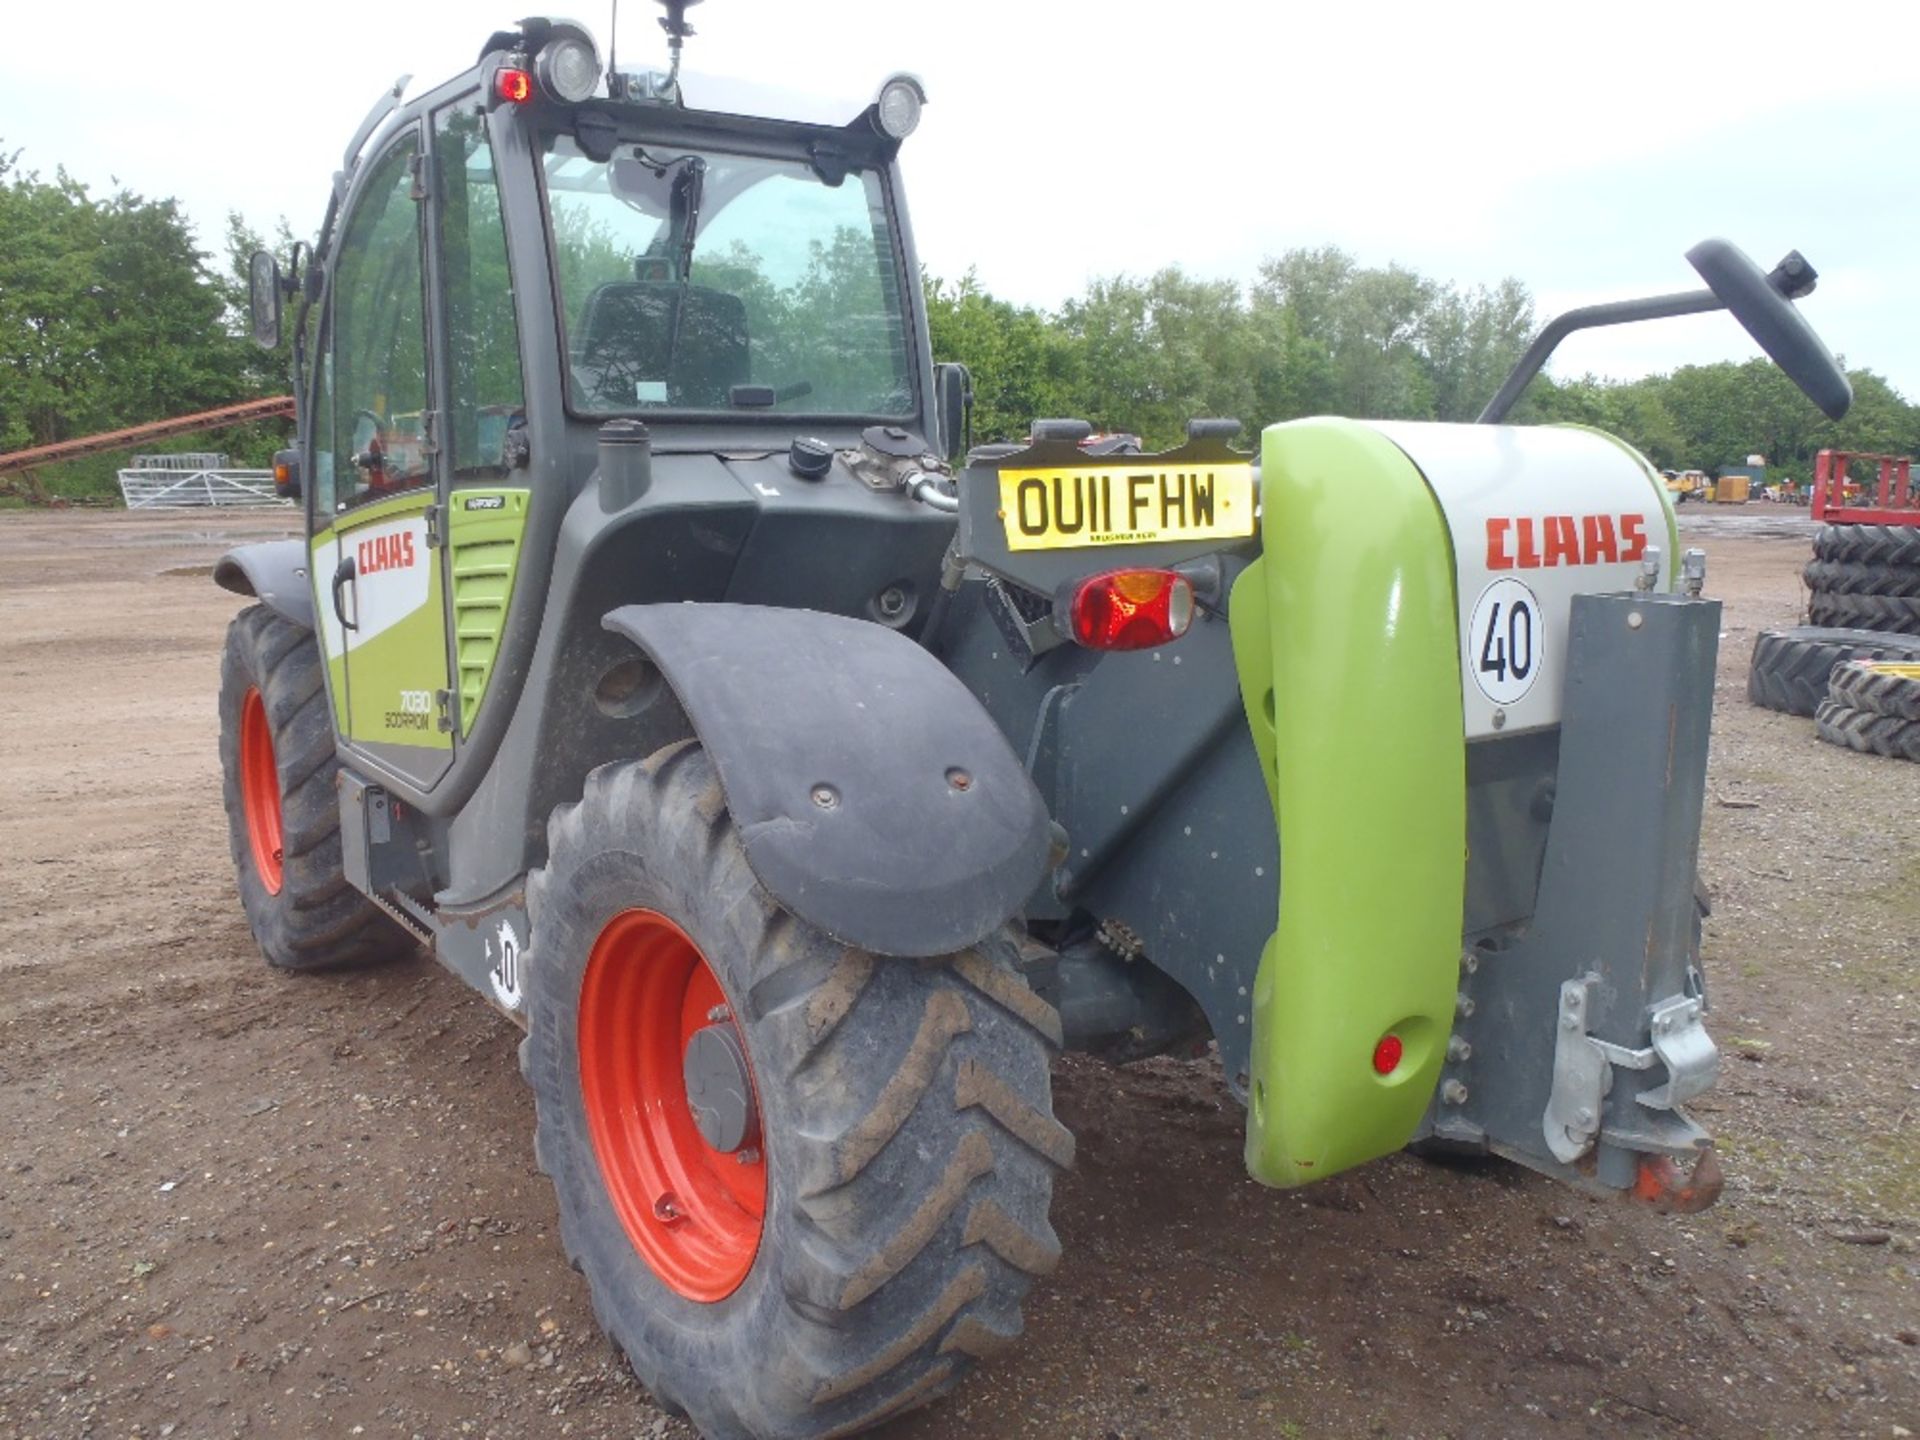 Claas Scorpion 7030. V5 will be supplied Reg. No. OU11 FHW Ser No 401030601 - Image 5 of 6